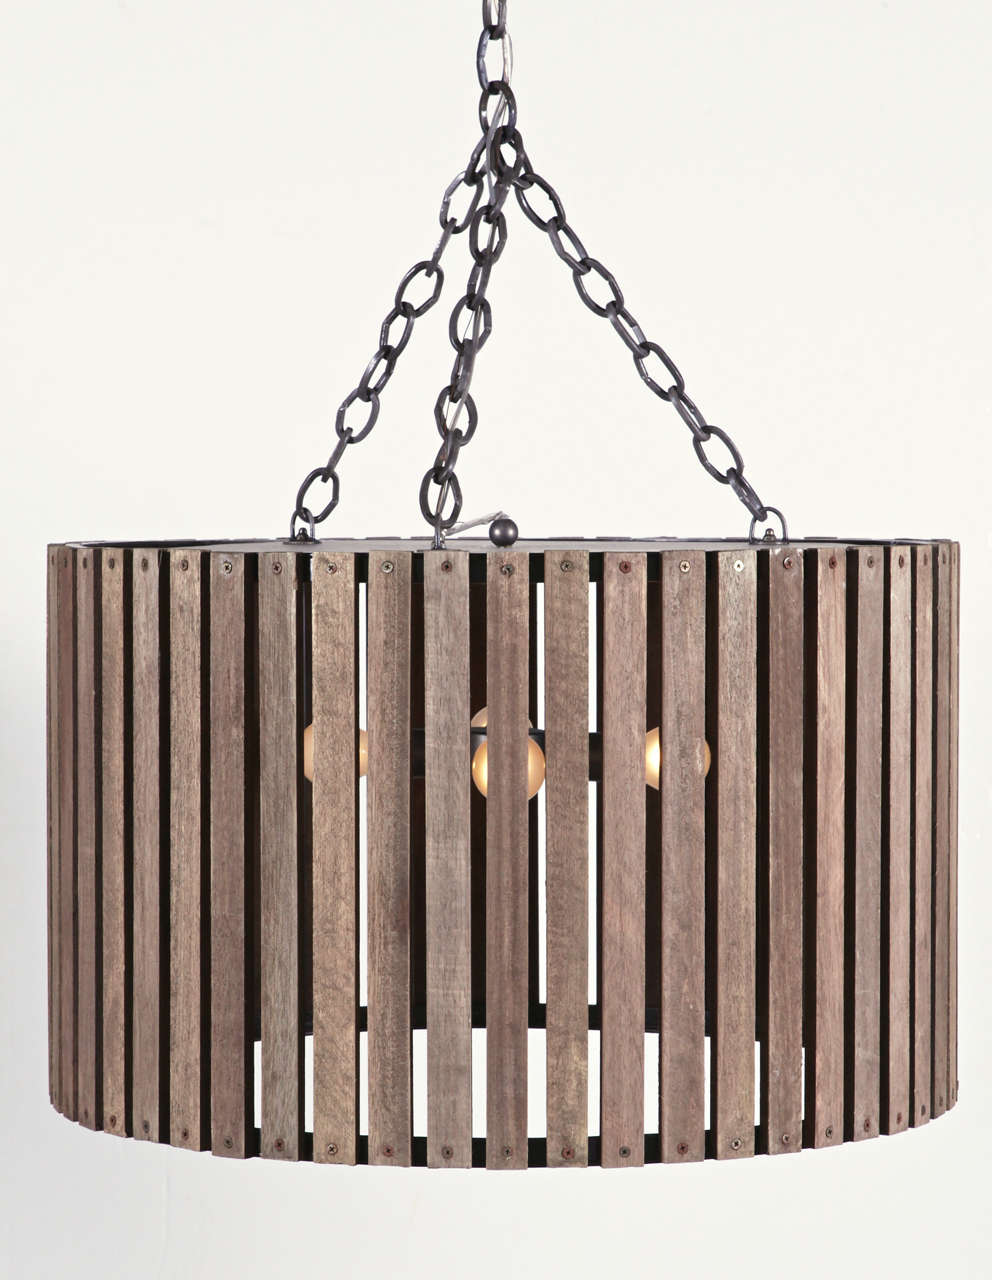 Four-light drum pendants
Distress wood slat in age brown finish
Perforated matte black iron diffuser sits at the top, creating pinpoint shadows on the ceiling. 

Four bulbs/ 25 wattage 
includes canopy and chain 

Sold separately.
 